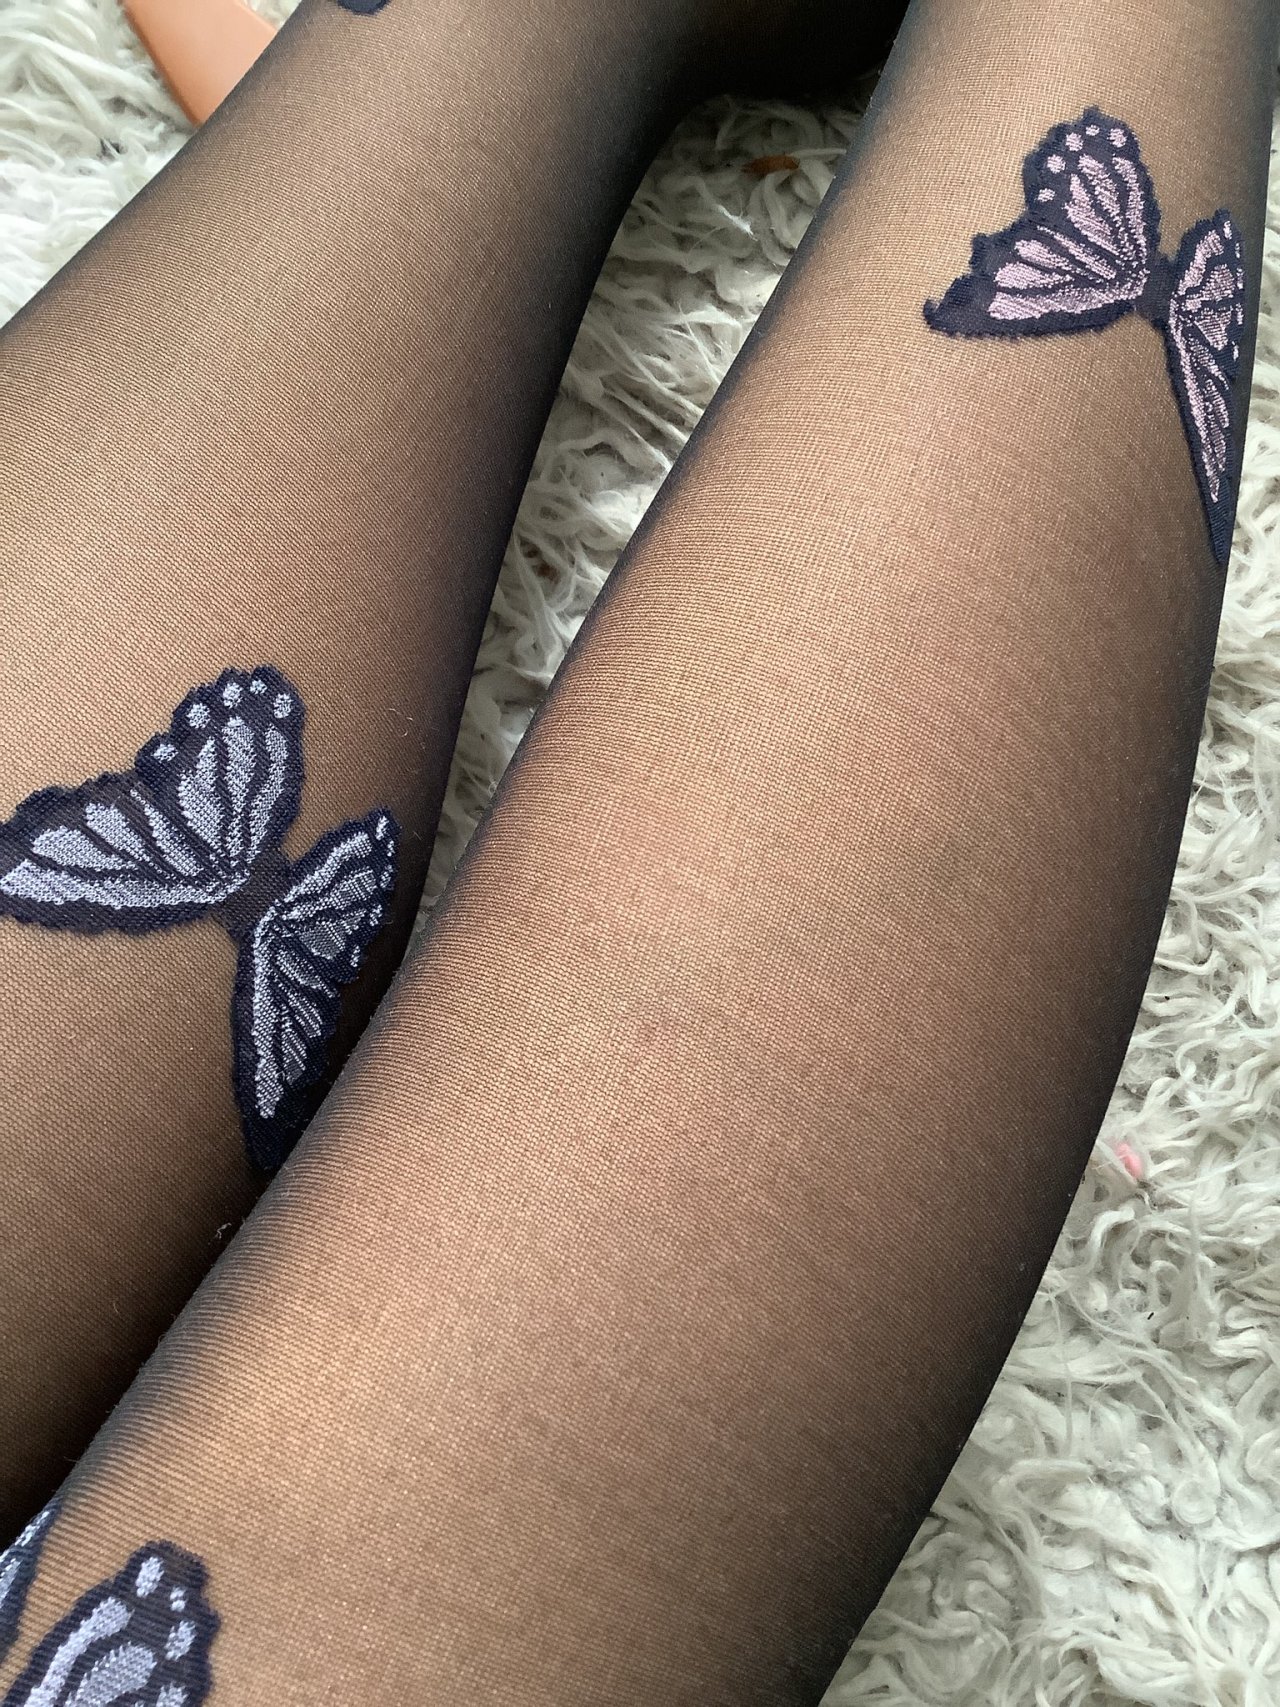 Sex tights-details 687598544847355904 pictures